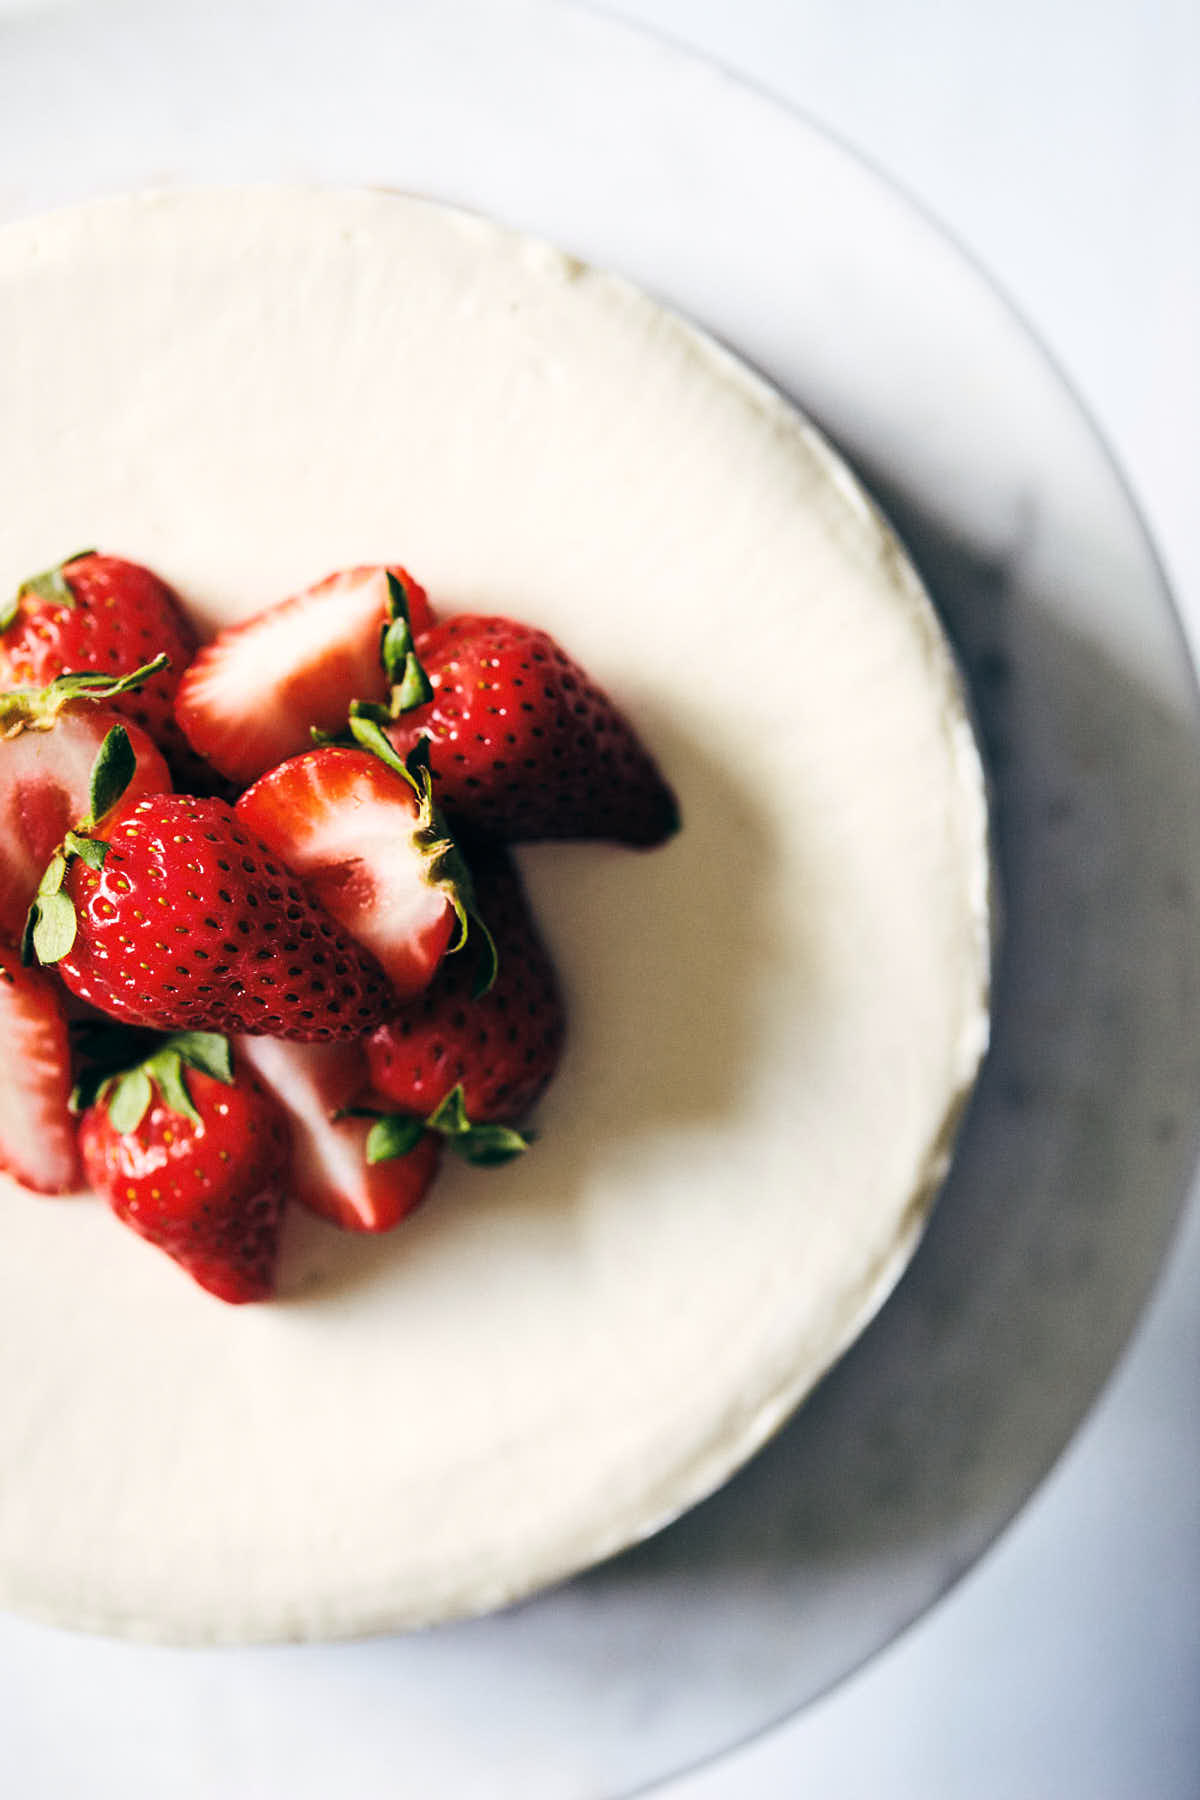 Cheesecake topped with strawberries